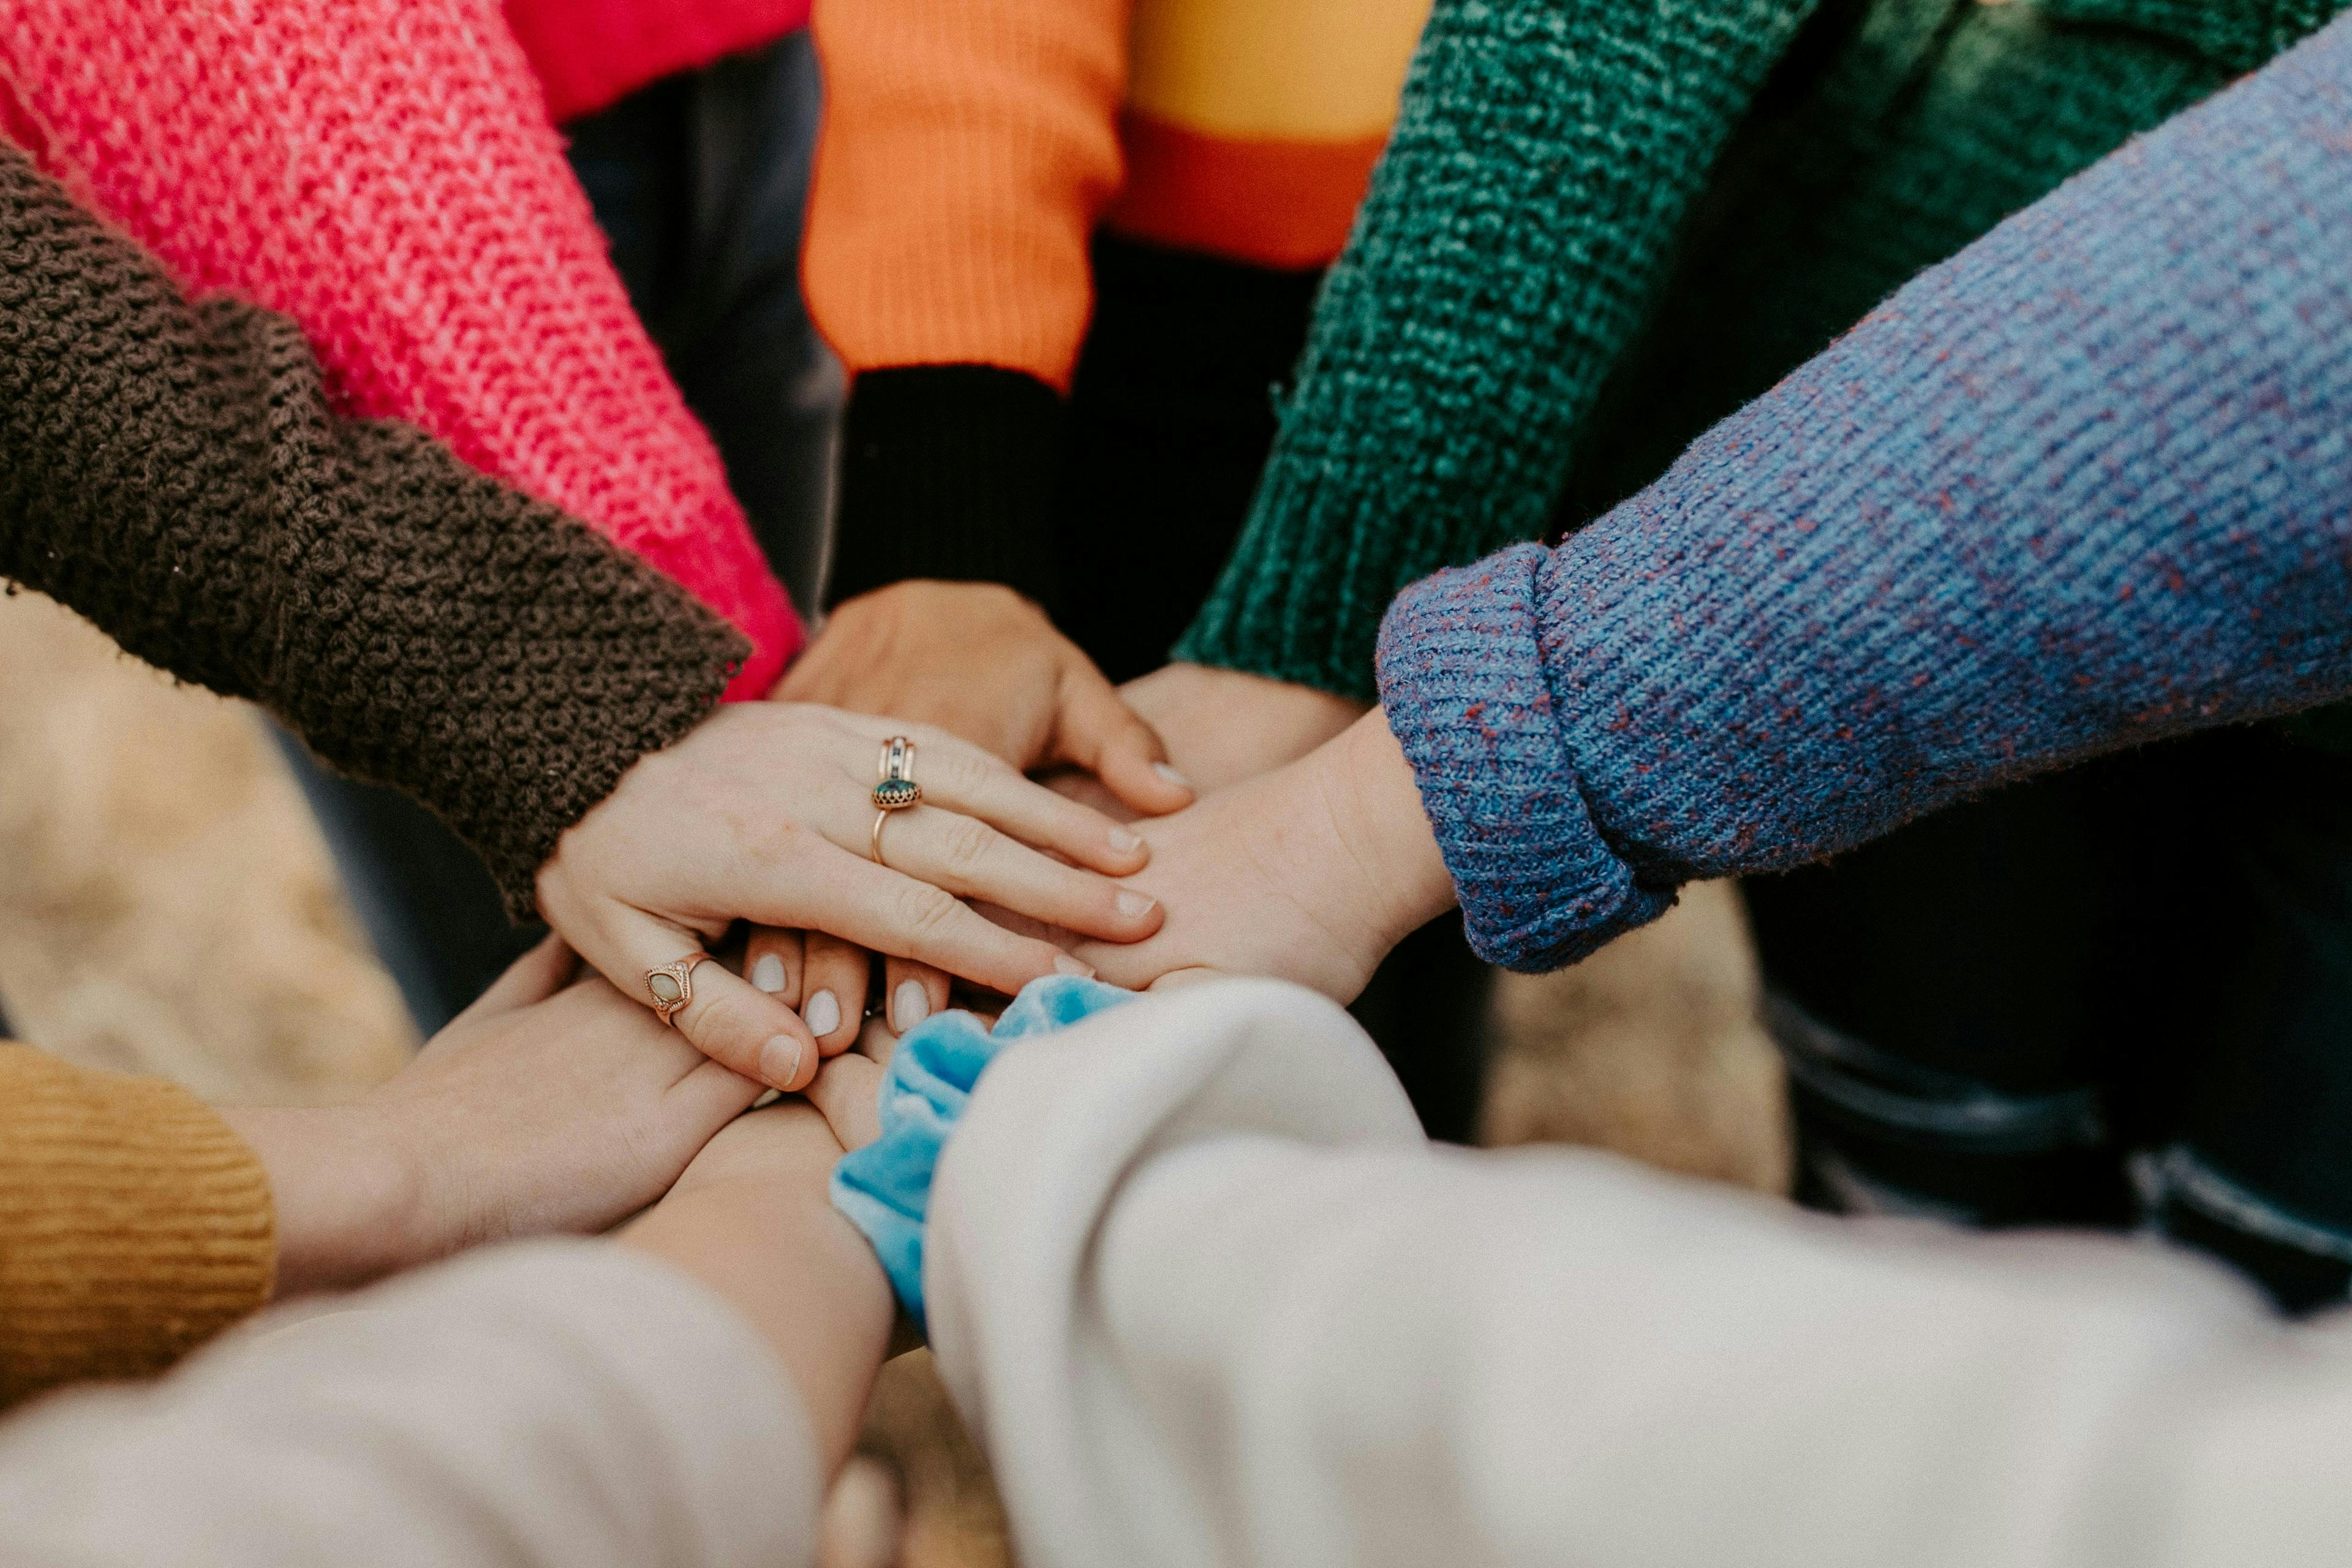 A group of people, wearing colorful sweaters, place their hands together in the center, signifying unity and teamwork in an outdoor setting.